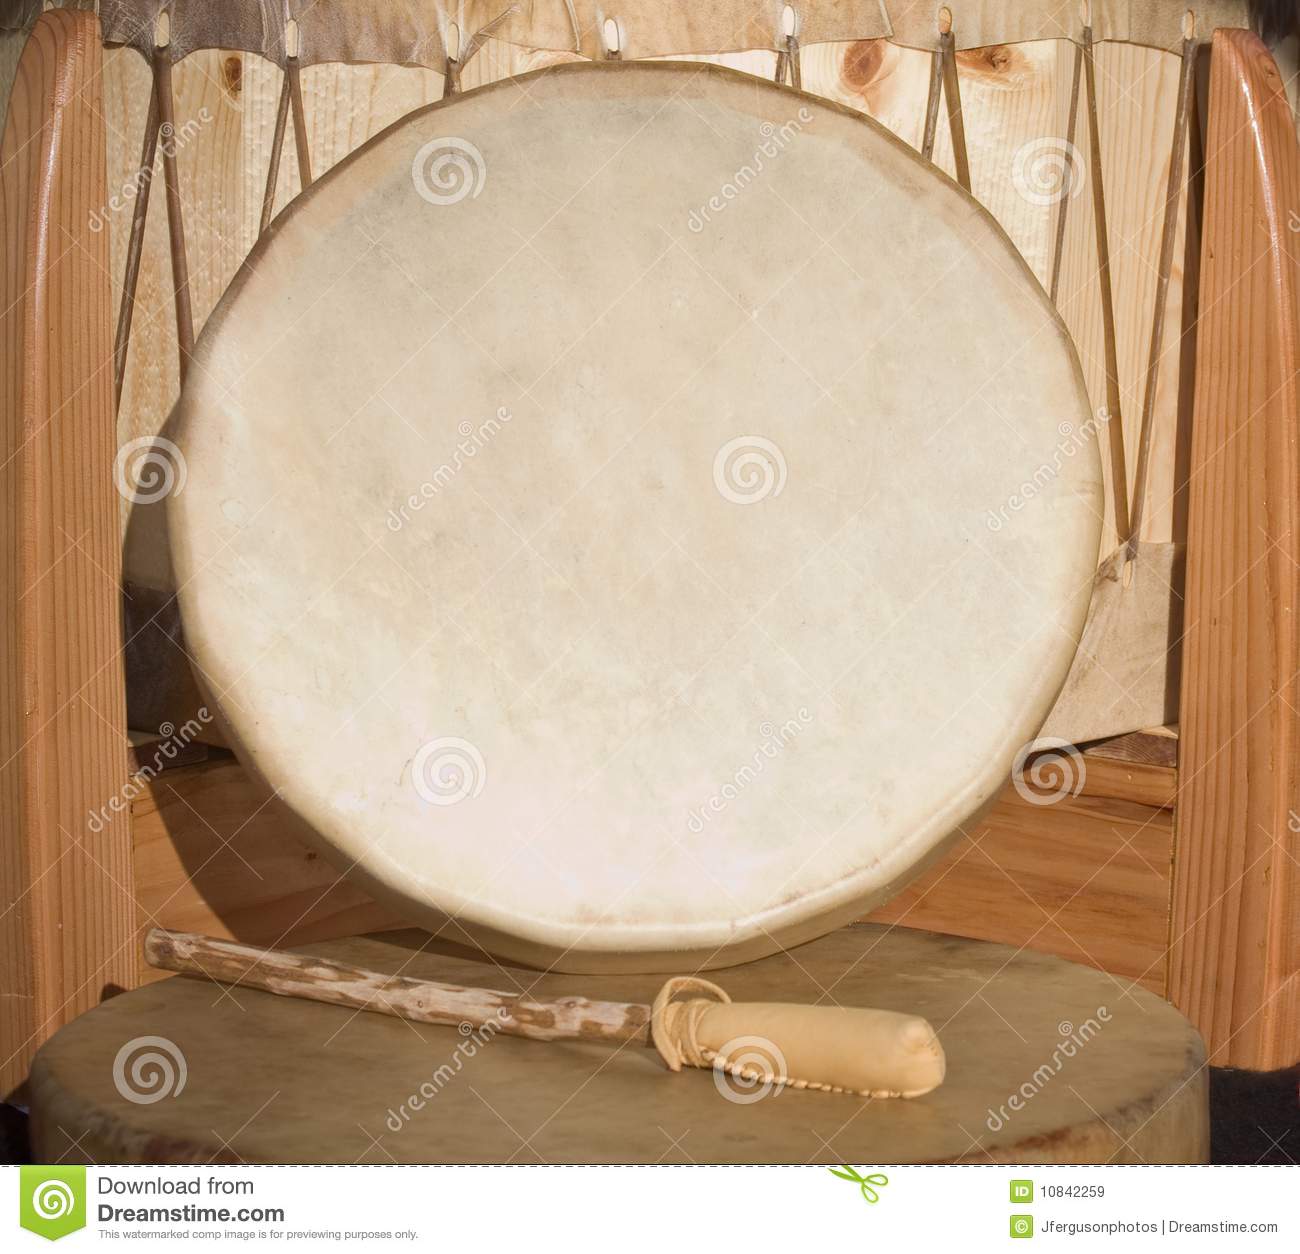 Native American Shaman Powwow Hand Drum And Beater Royalty Free Stock